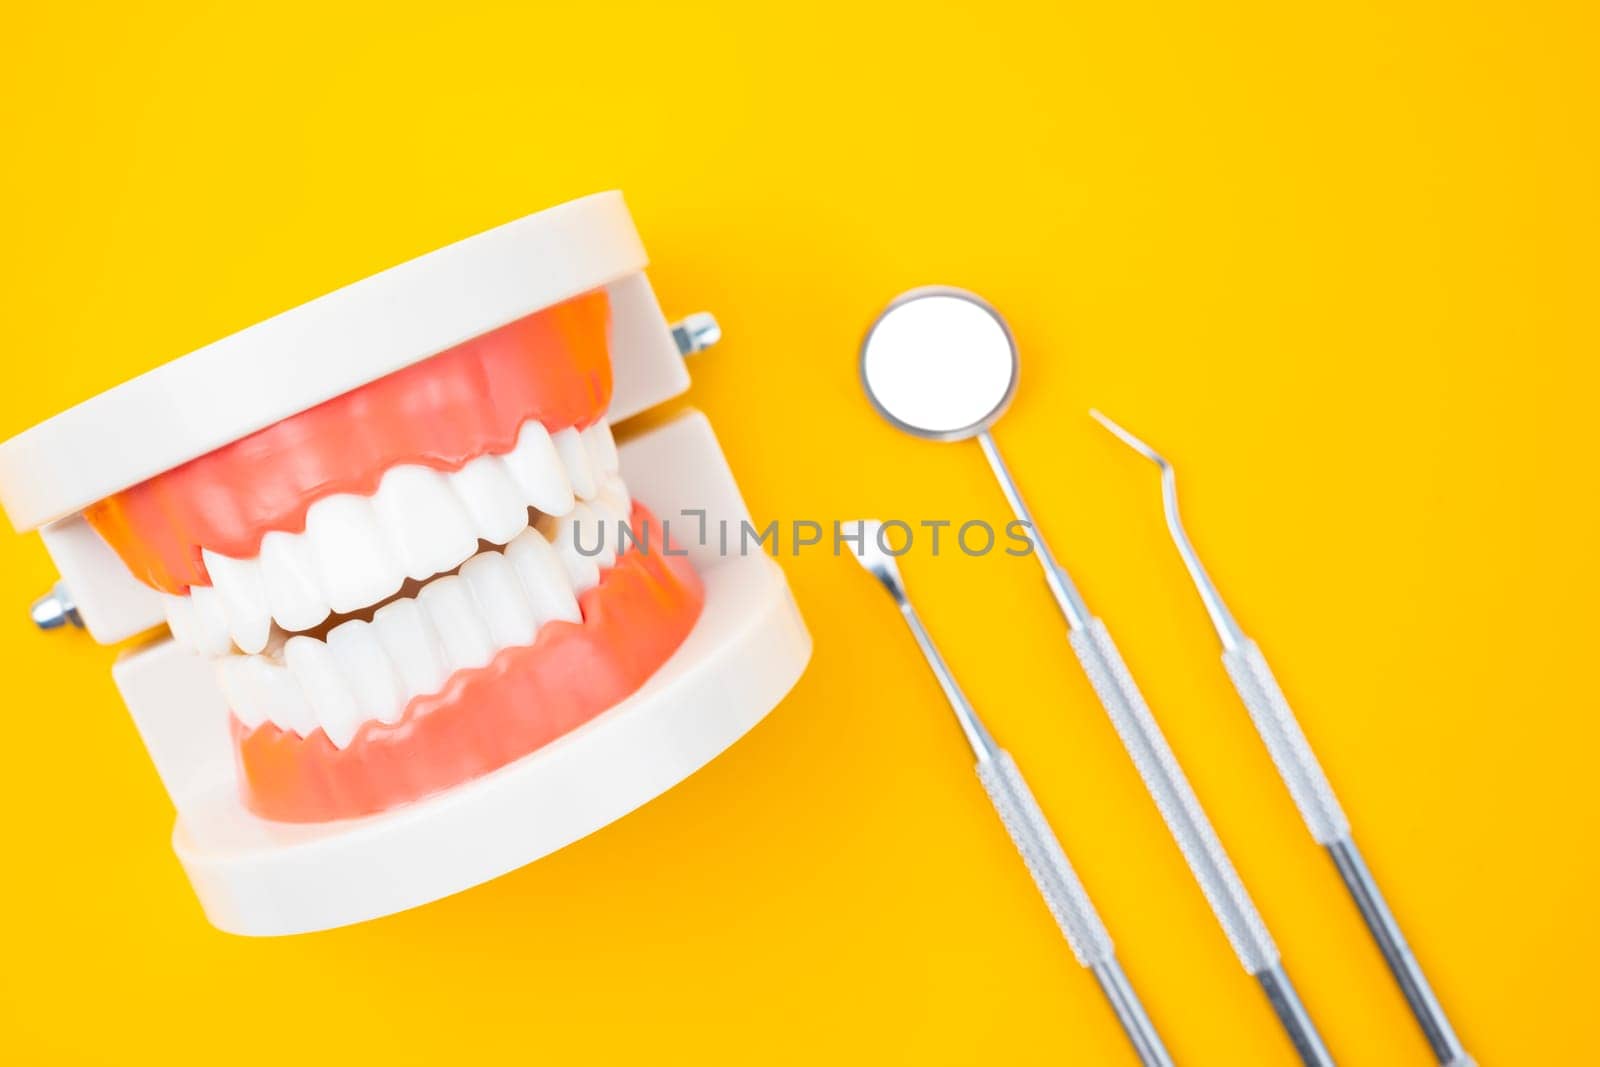 The Dentures model and instrument dental on yellow background. by Gamjai